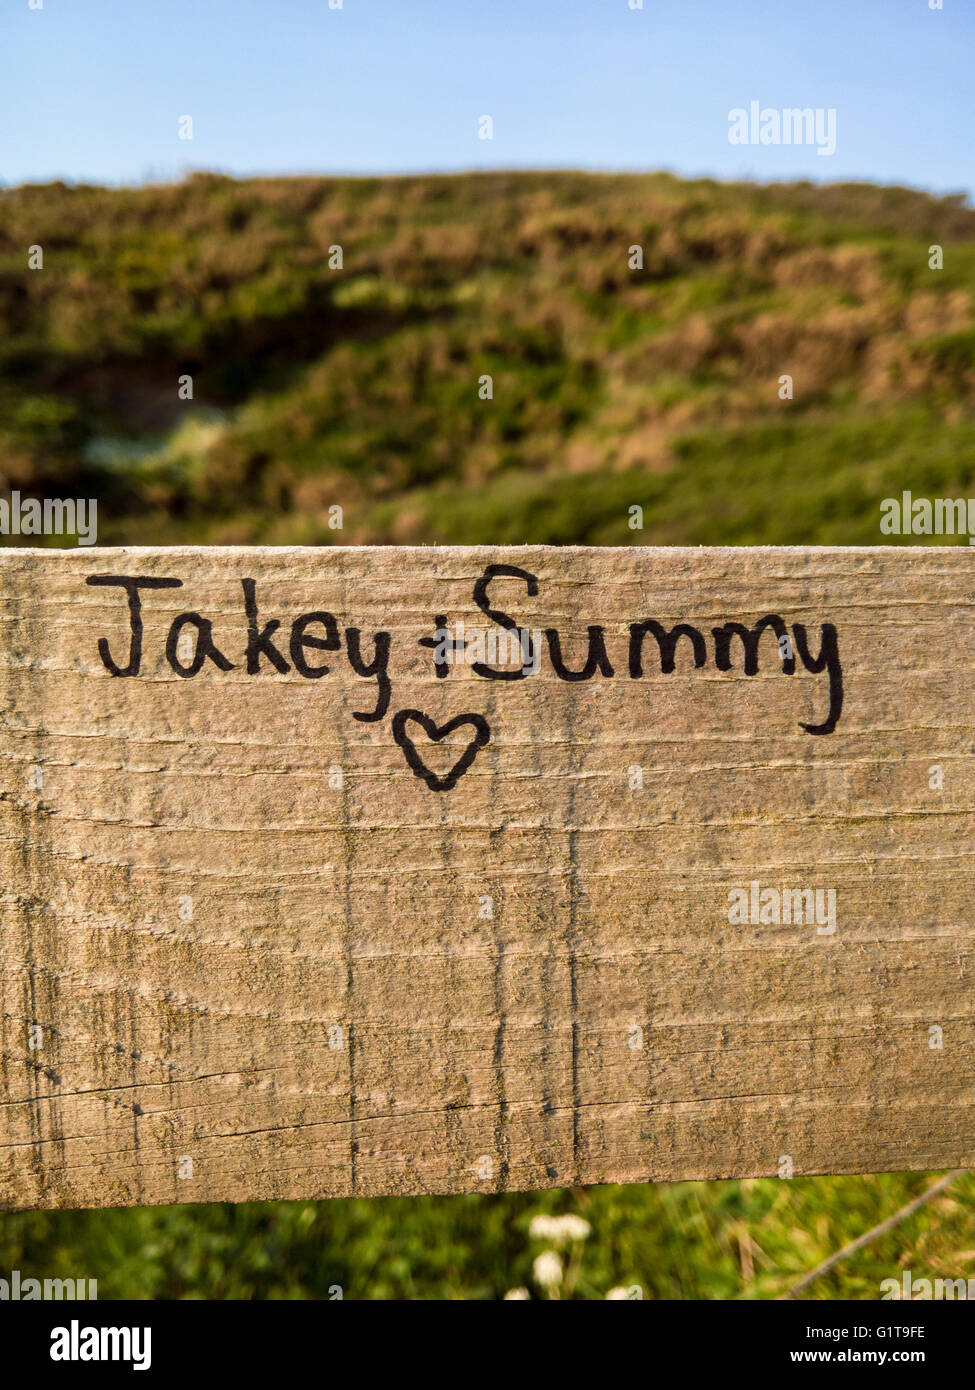 A declaration of love written on a wooden fence in the Devon countryside, England. Stock Photo